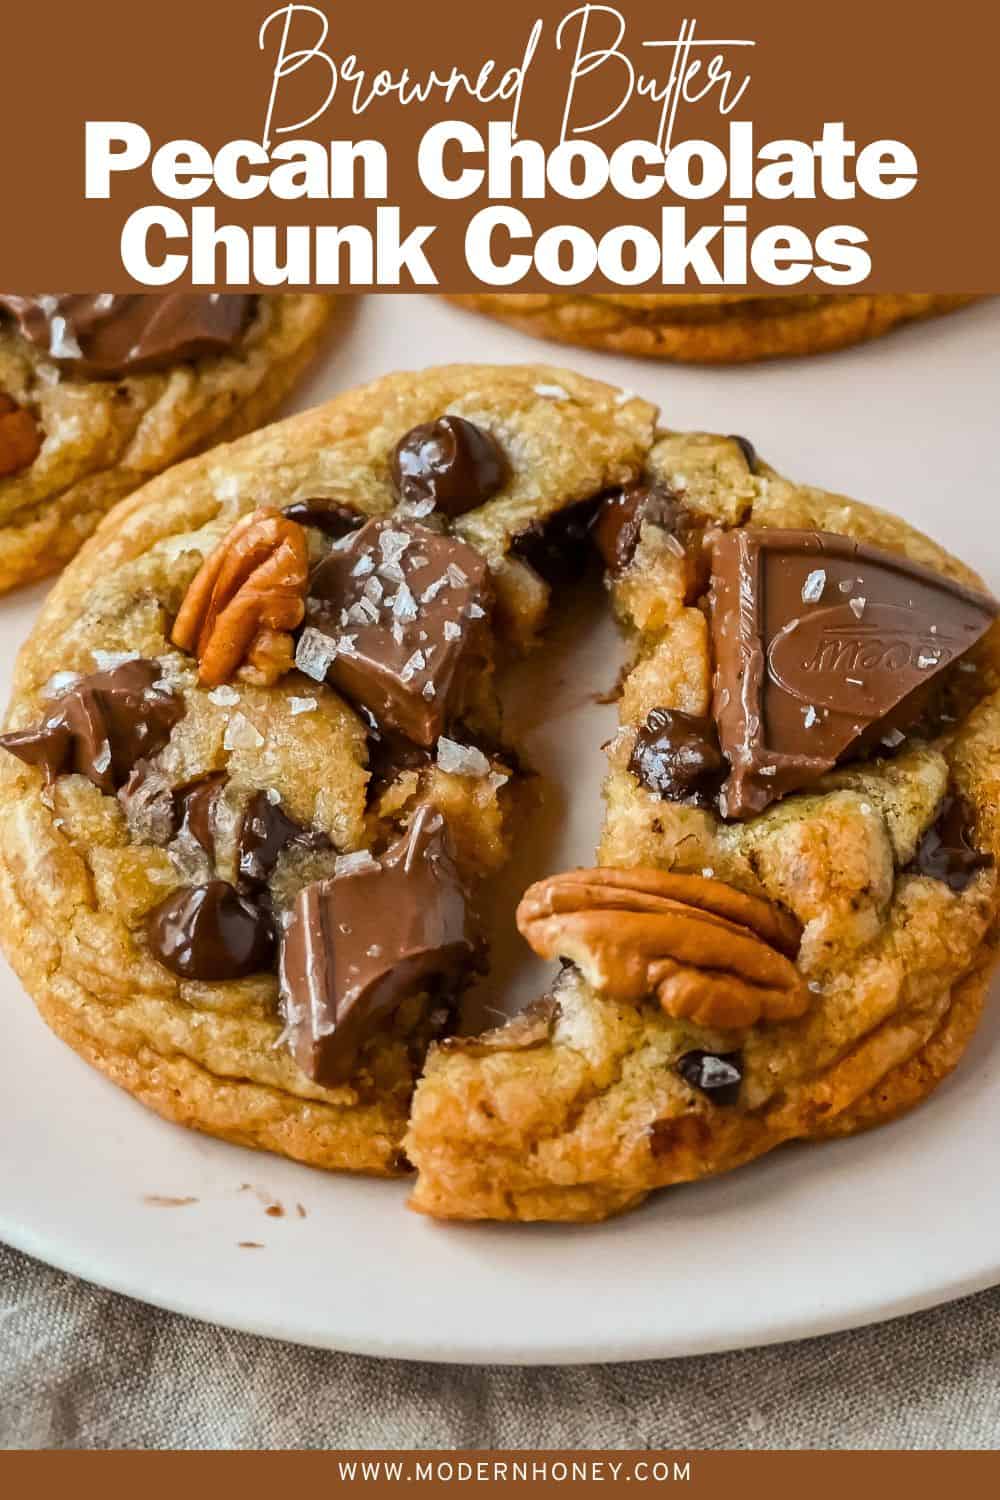 Browned Butter Pecan Chocolate Chunk Cookies. hese rich, buttery browned butter pecan cookies with chocolate chunks are the perfect soft, chewy, and nutty cookie. The browned butter is the star ingredient!